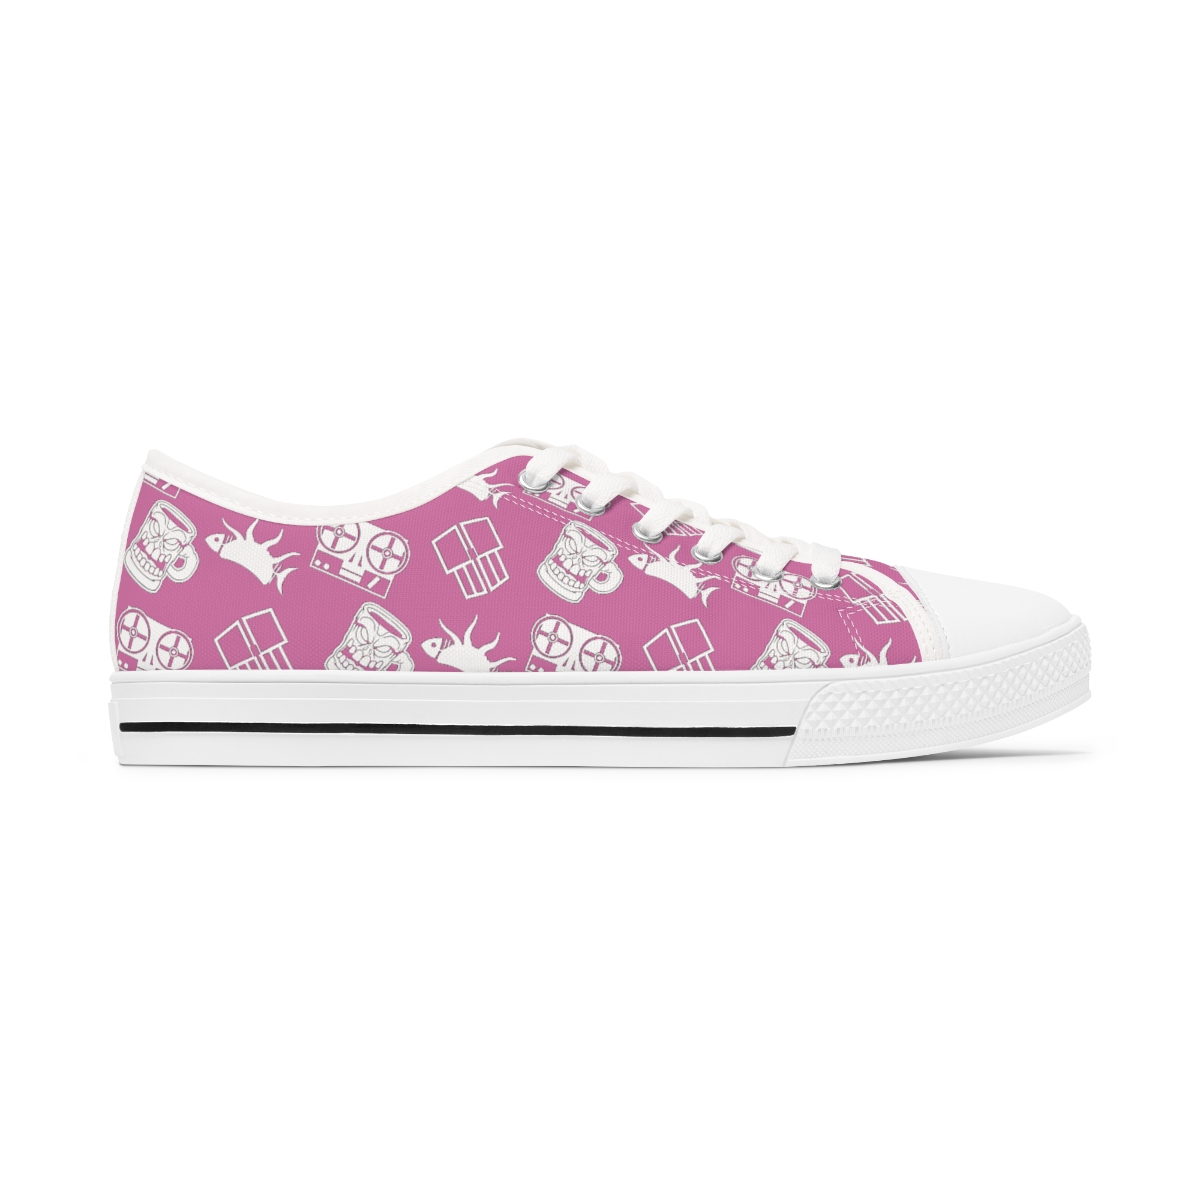 Stealthy Sneaks {Pinkerton Women's Low Top Sneakers} product thumbnail image